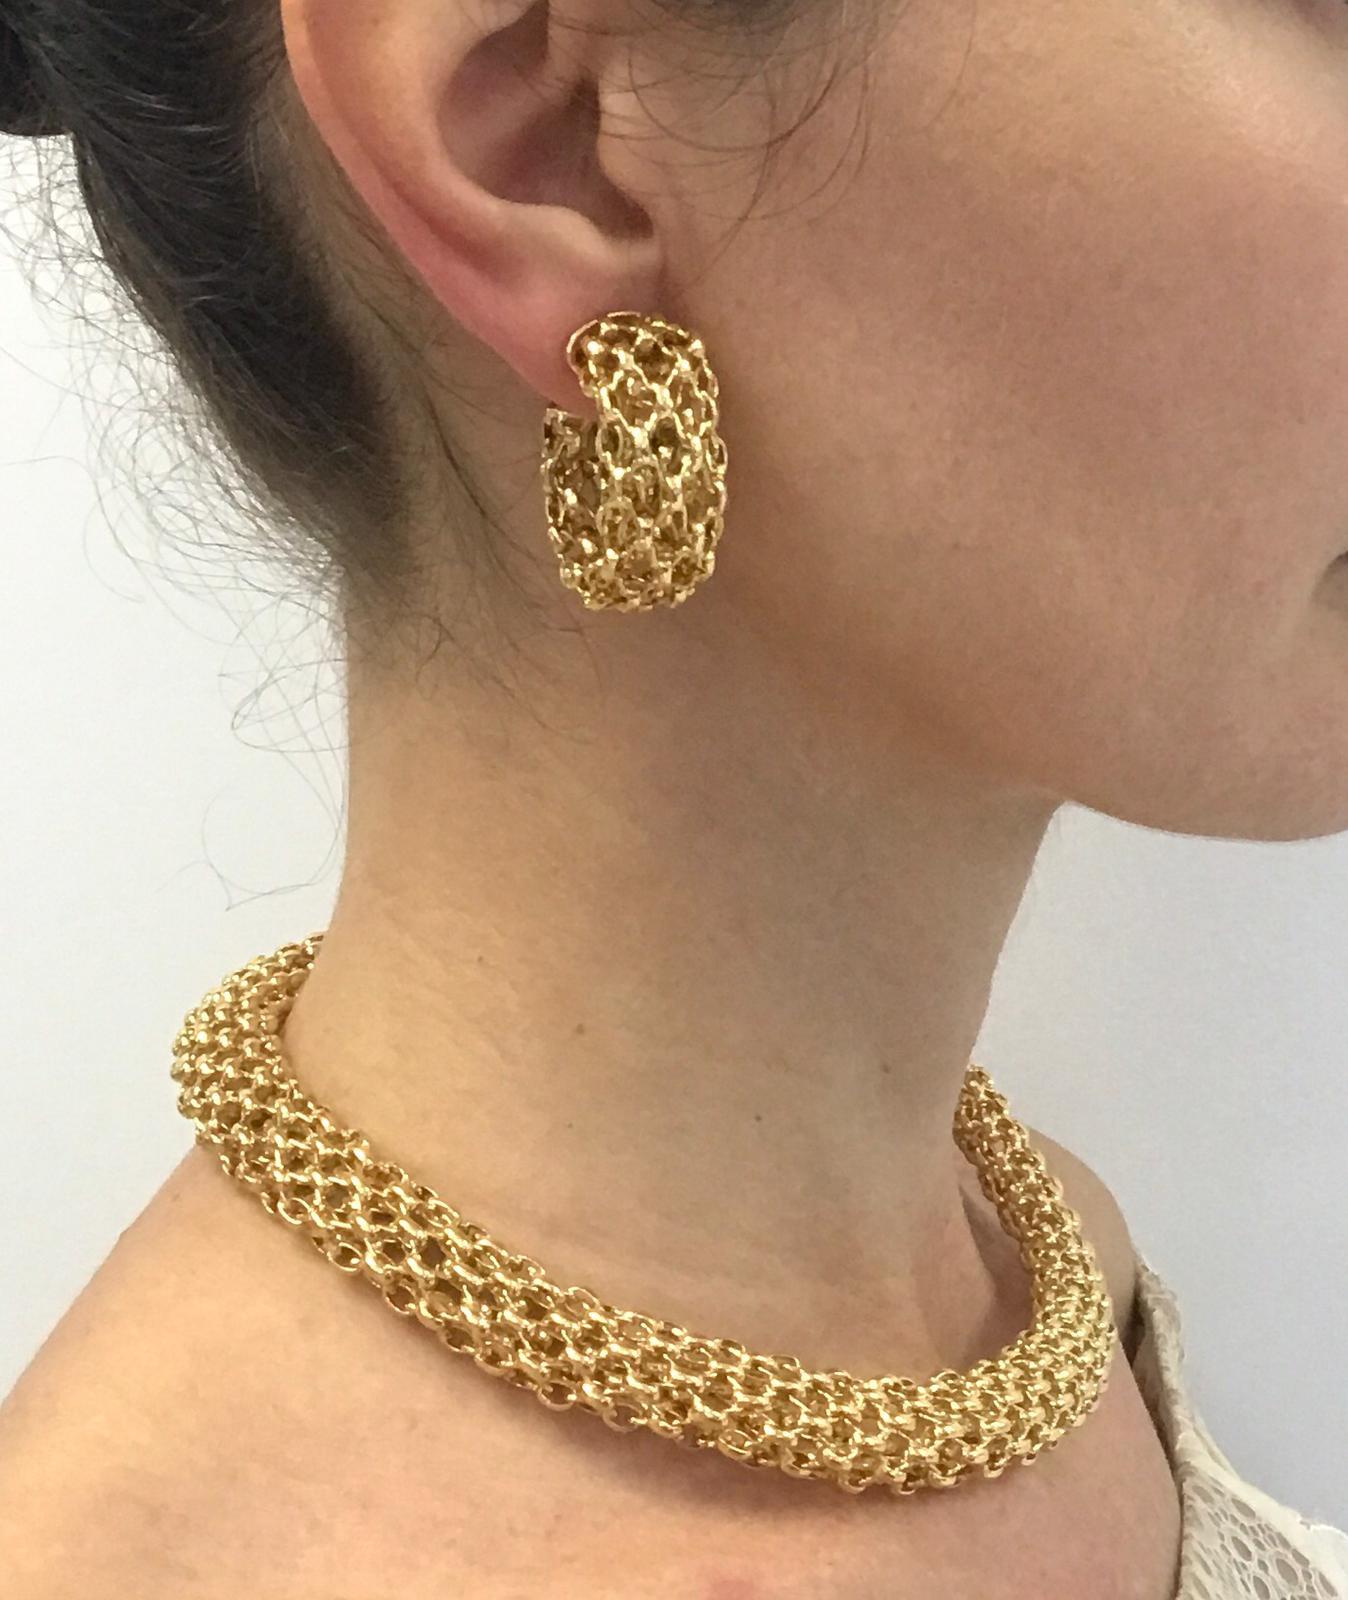 Van Cleef and Arpels!
 Beautiful open woven-link  design demi-parure consisting of matching necklace and ear-clips.
French eagle assay hallmark, signed and numbered.
Weight of 18k 190 grams
Necklace length is 17.25”
Made in France
